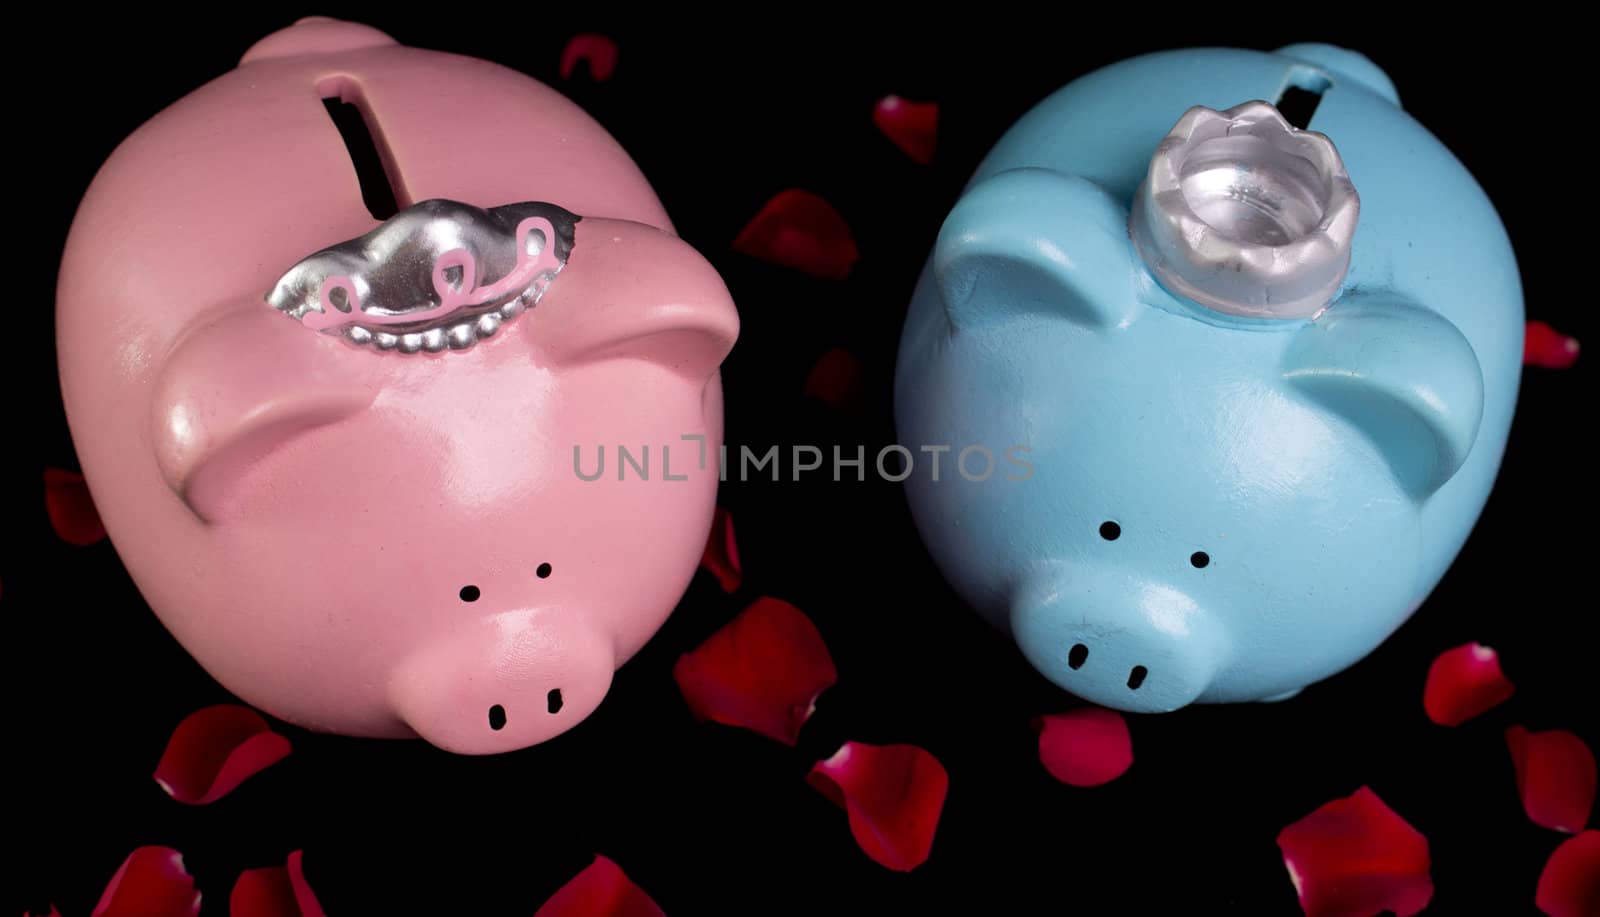 King & queen piggy banks on a bed of red rose petals on black background